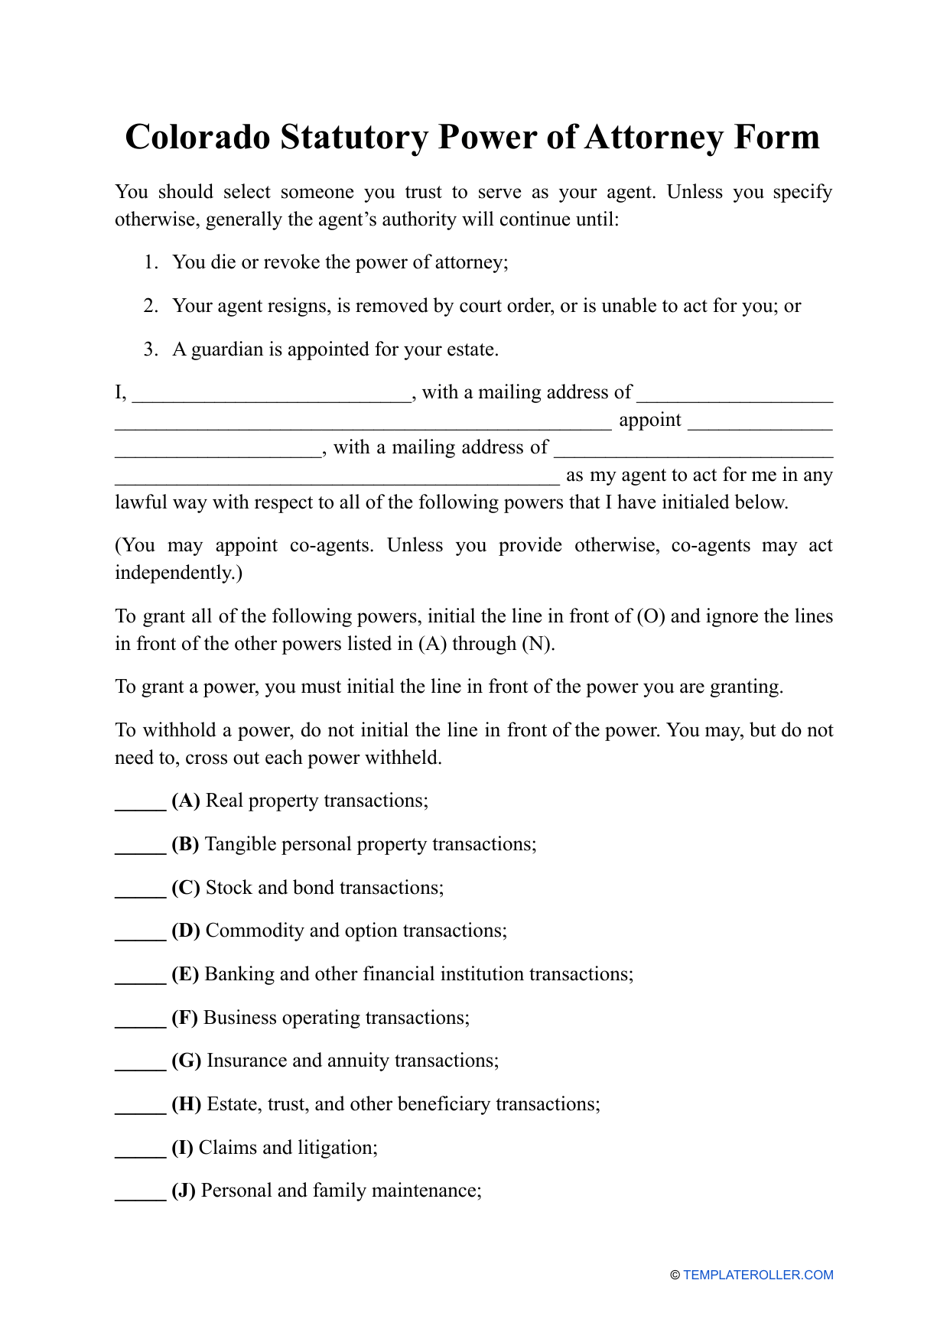 Statutory Power of Attorney Form - With Special Instructions - Colorado, Page 1